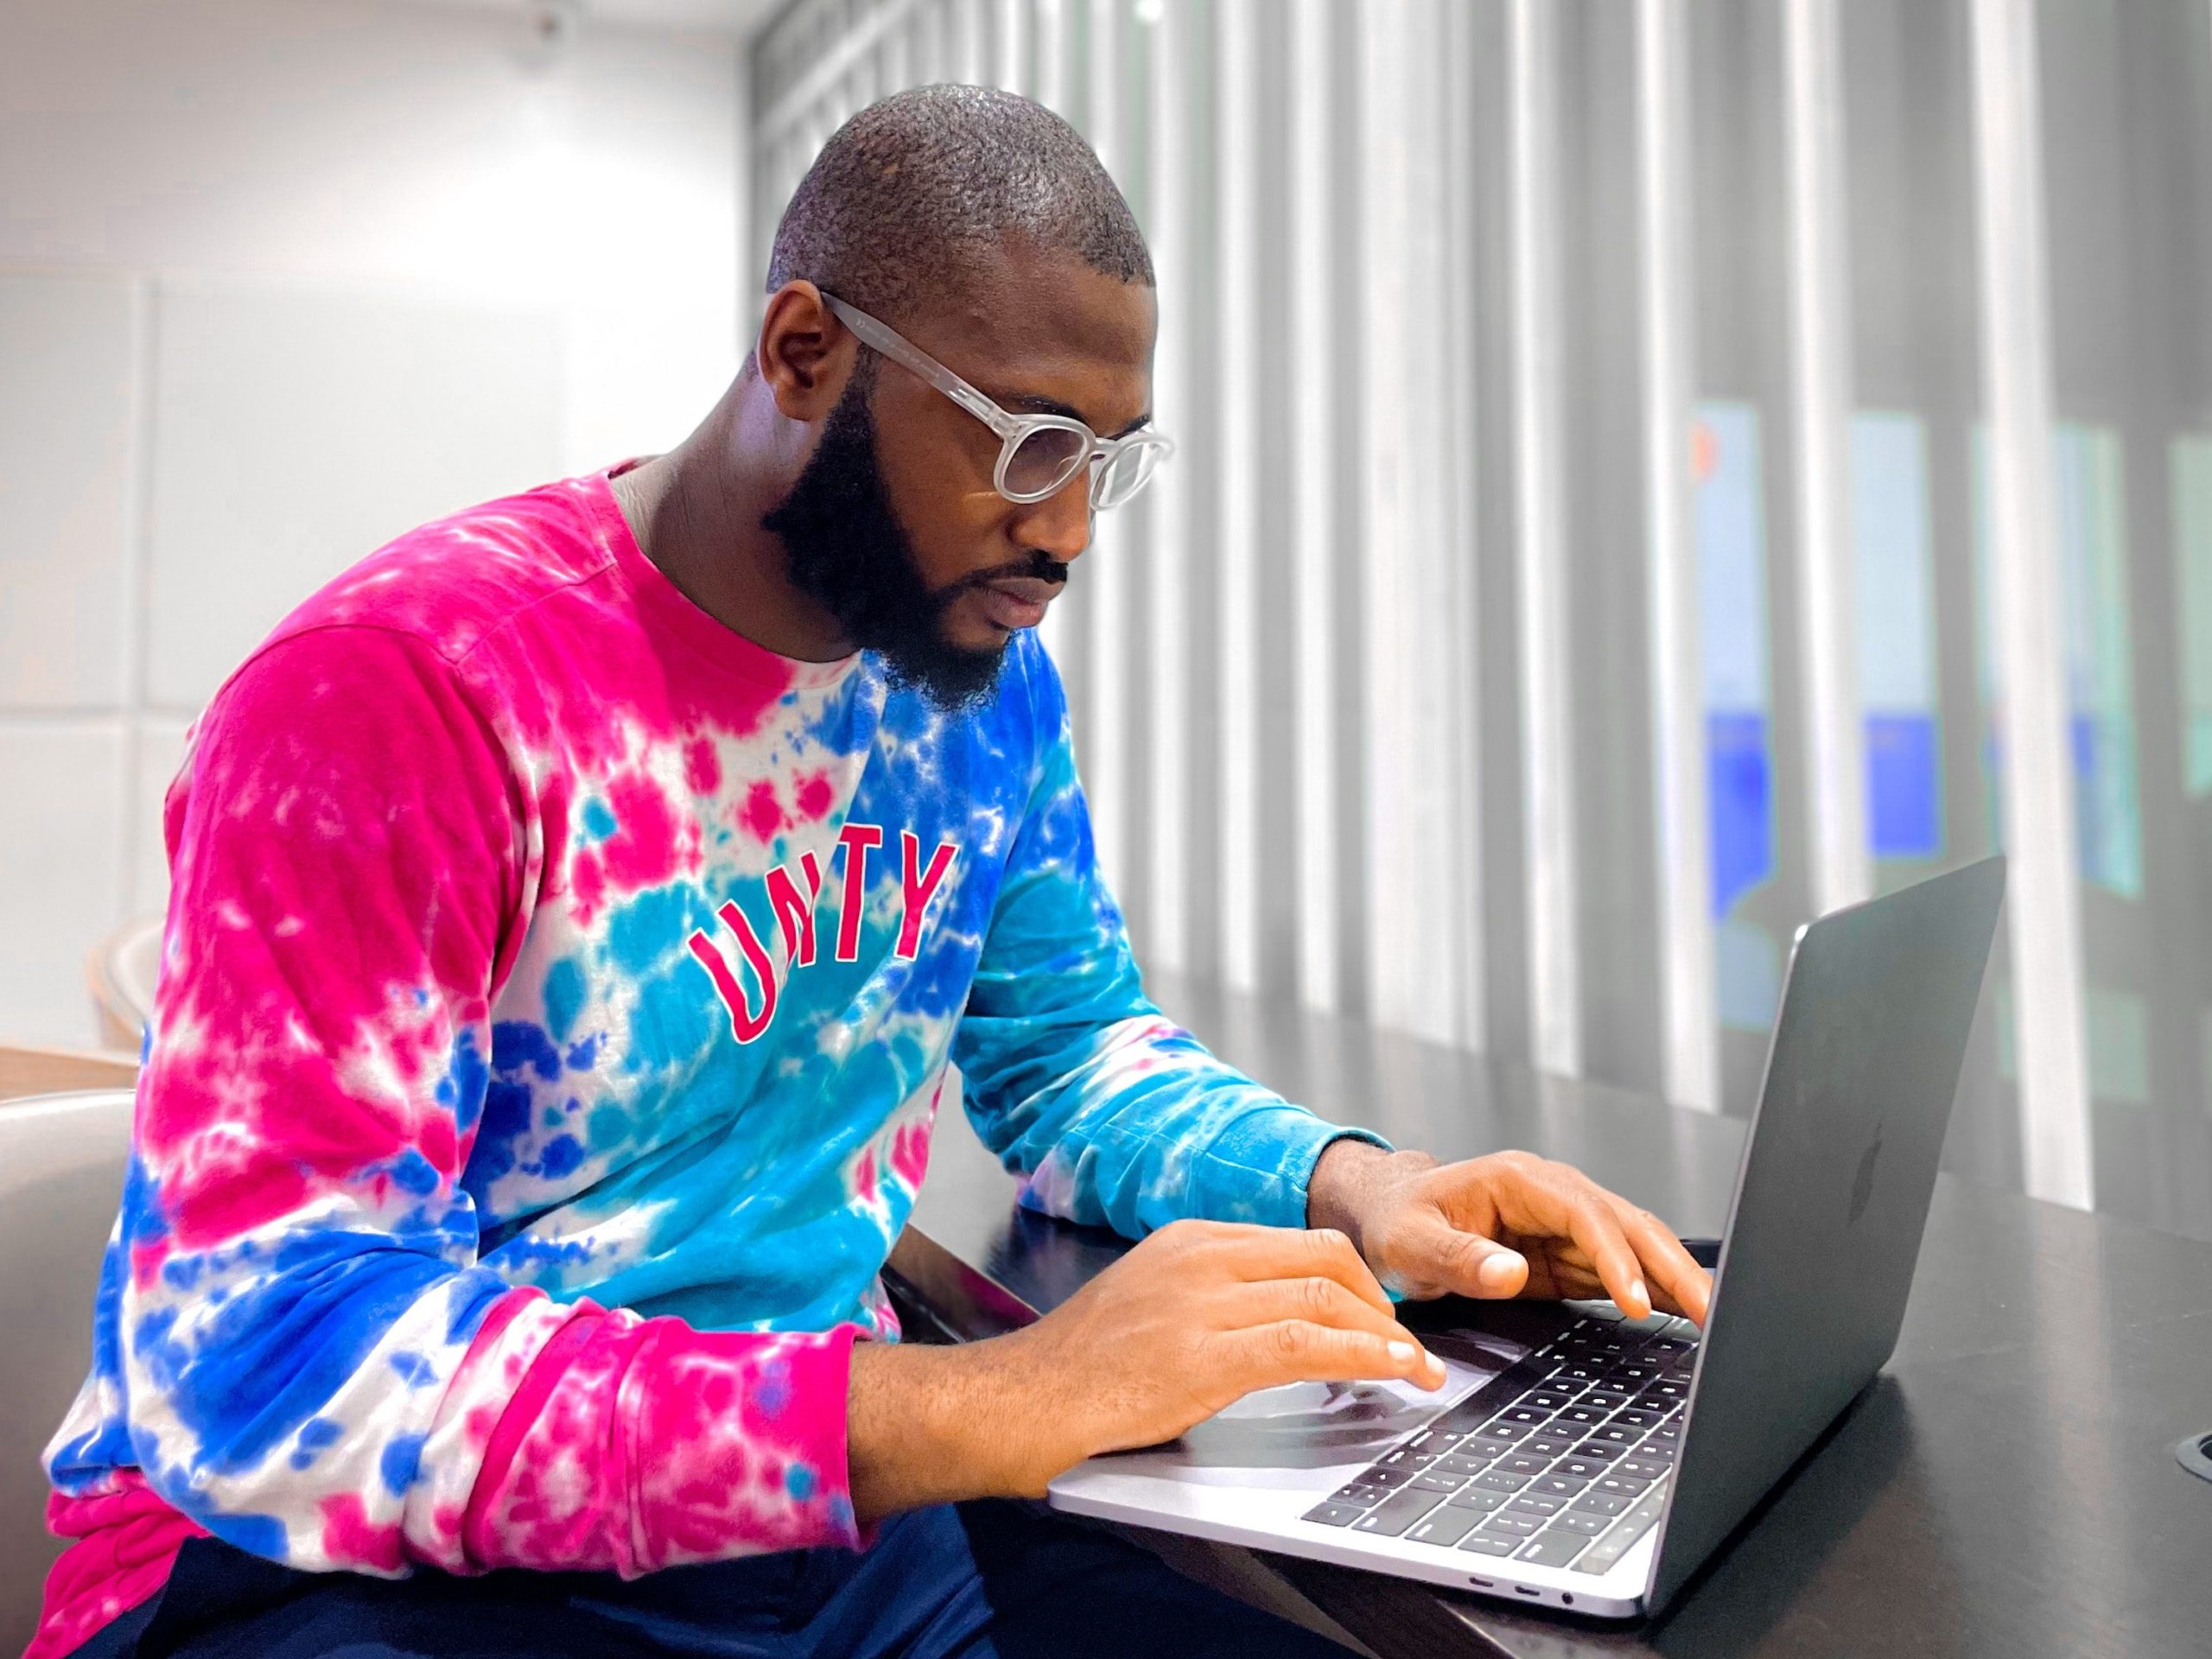 Man in colourful sweater works at laptop in stylish modern office